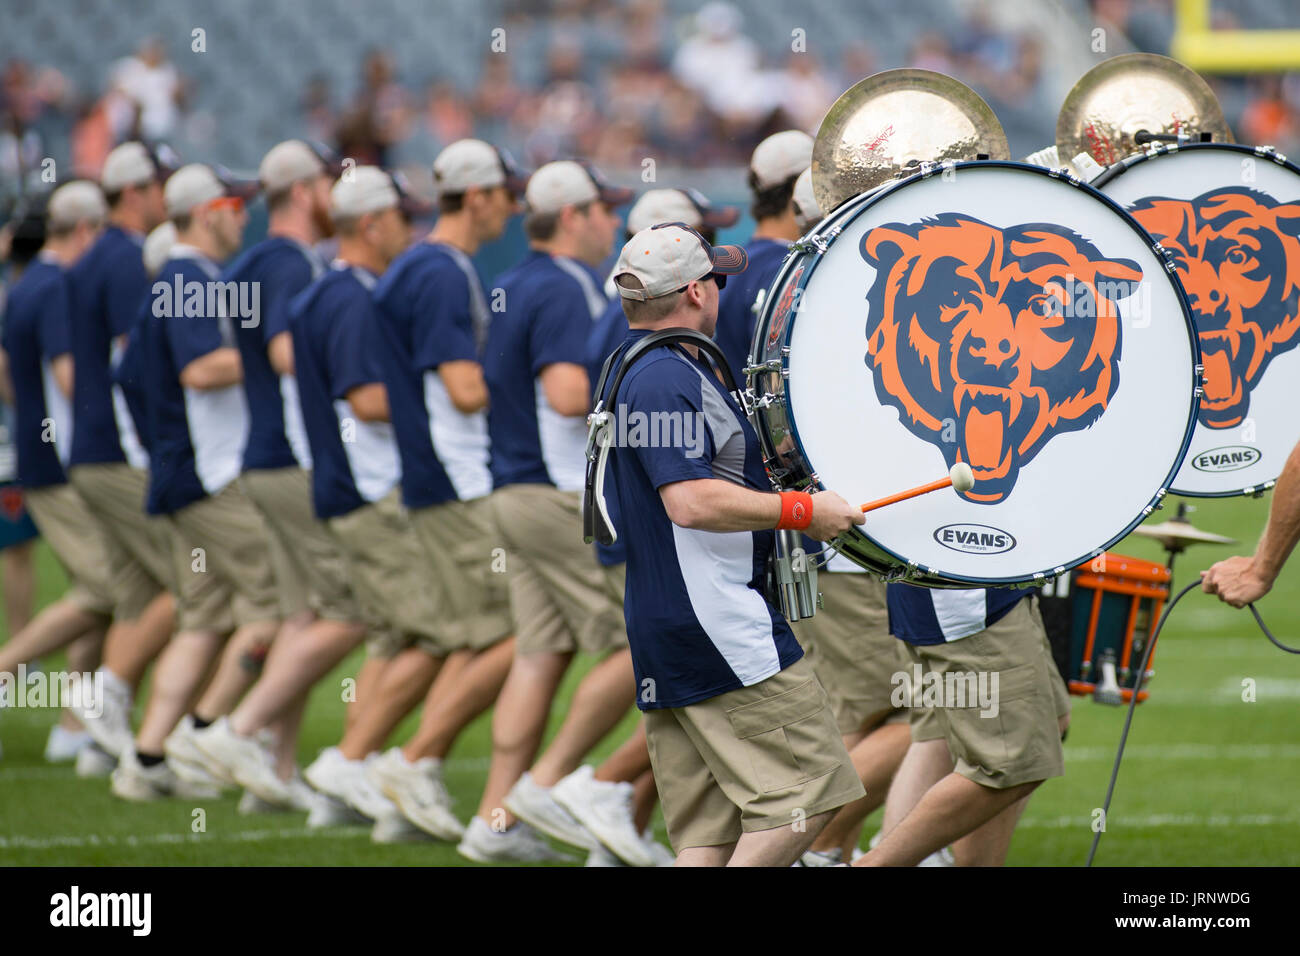 Chicago, Illinois, USA. 5th August, 2017. The Chicago Bears Drumline performs during training camp at Soldier Field in Chicago, IL. Credit: Cal Sport Media/Alamy Live News Stock Photo